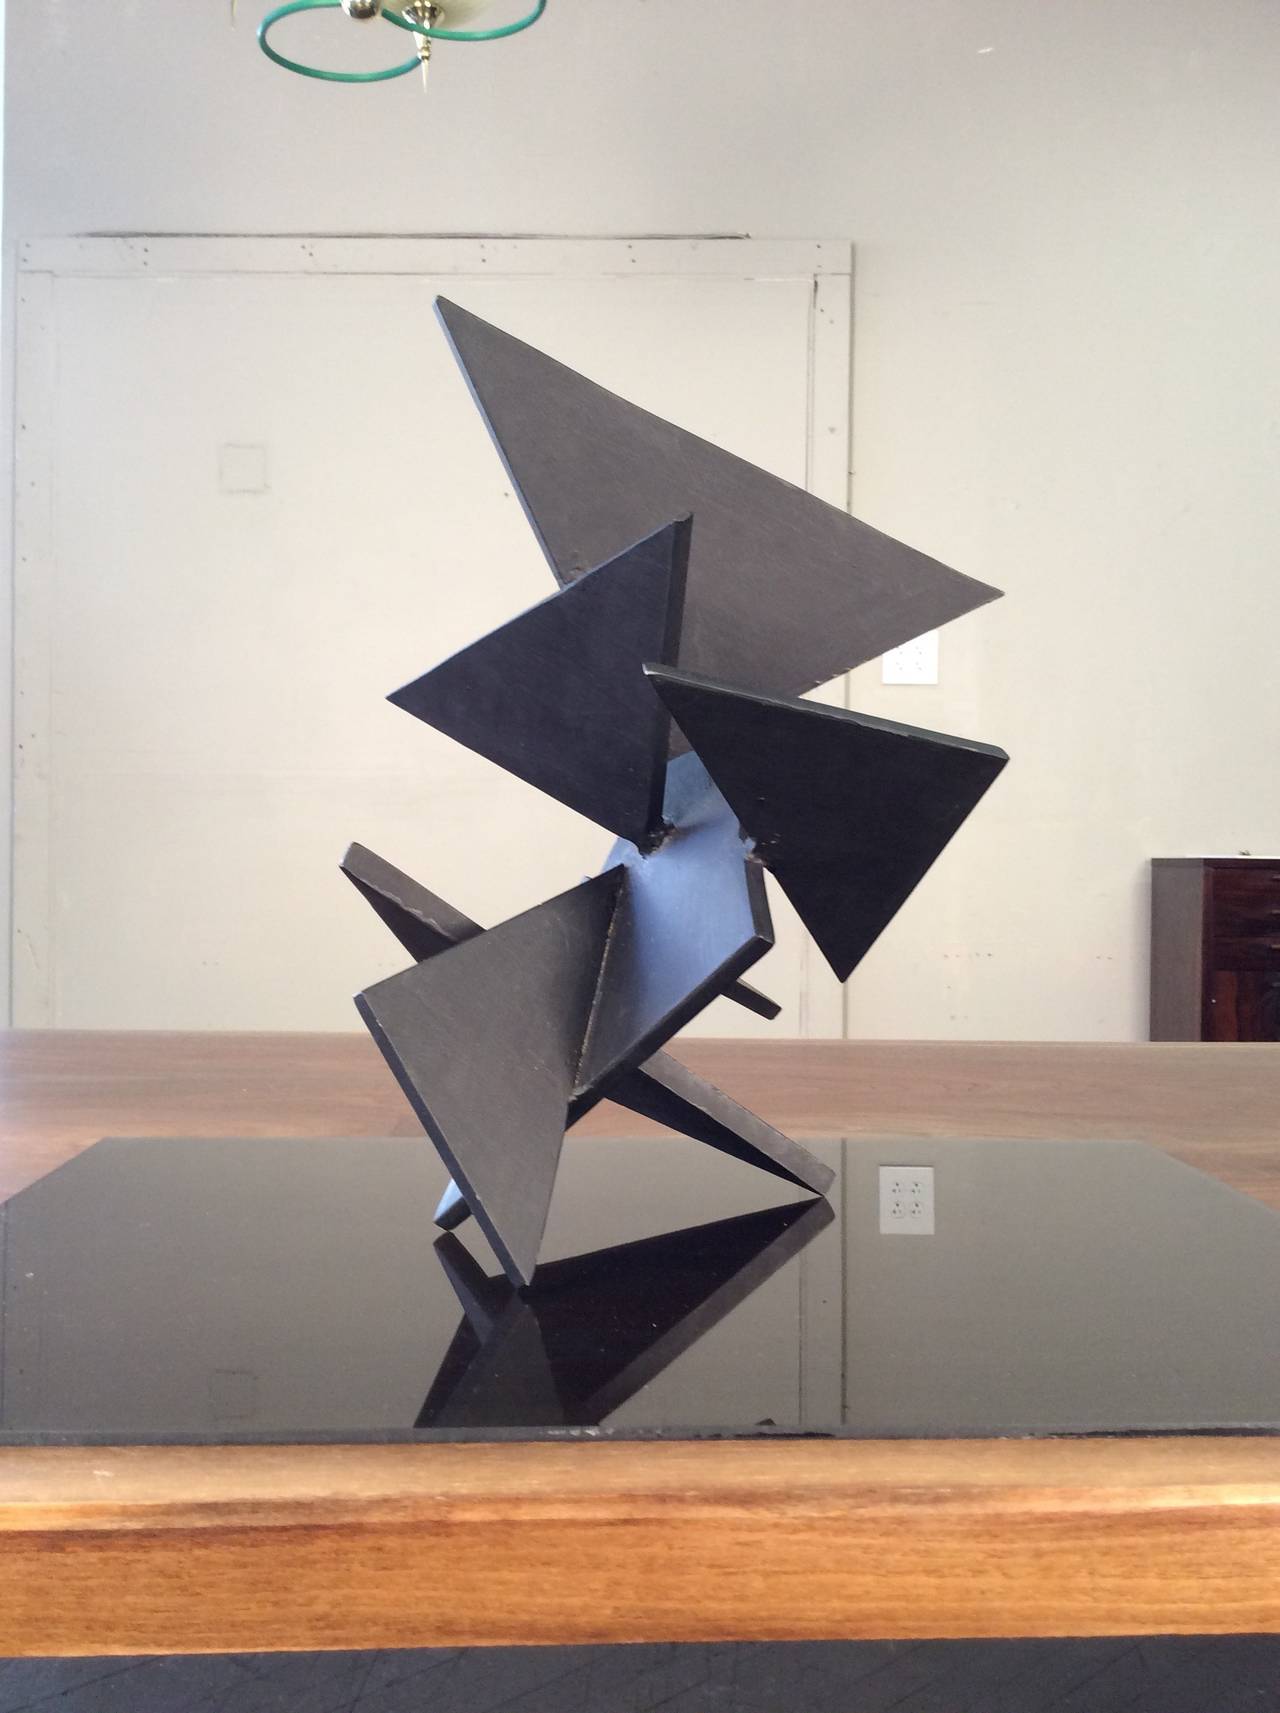 Geometric constructivist sculpture composed of thick steel triangles, signed 